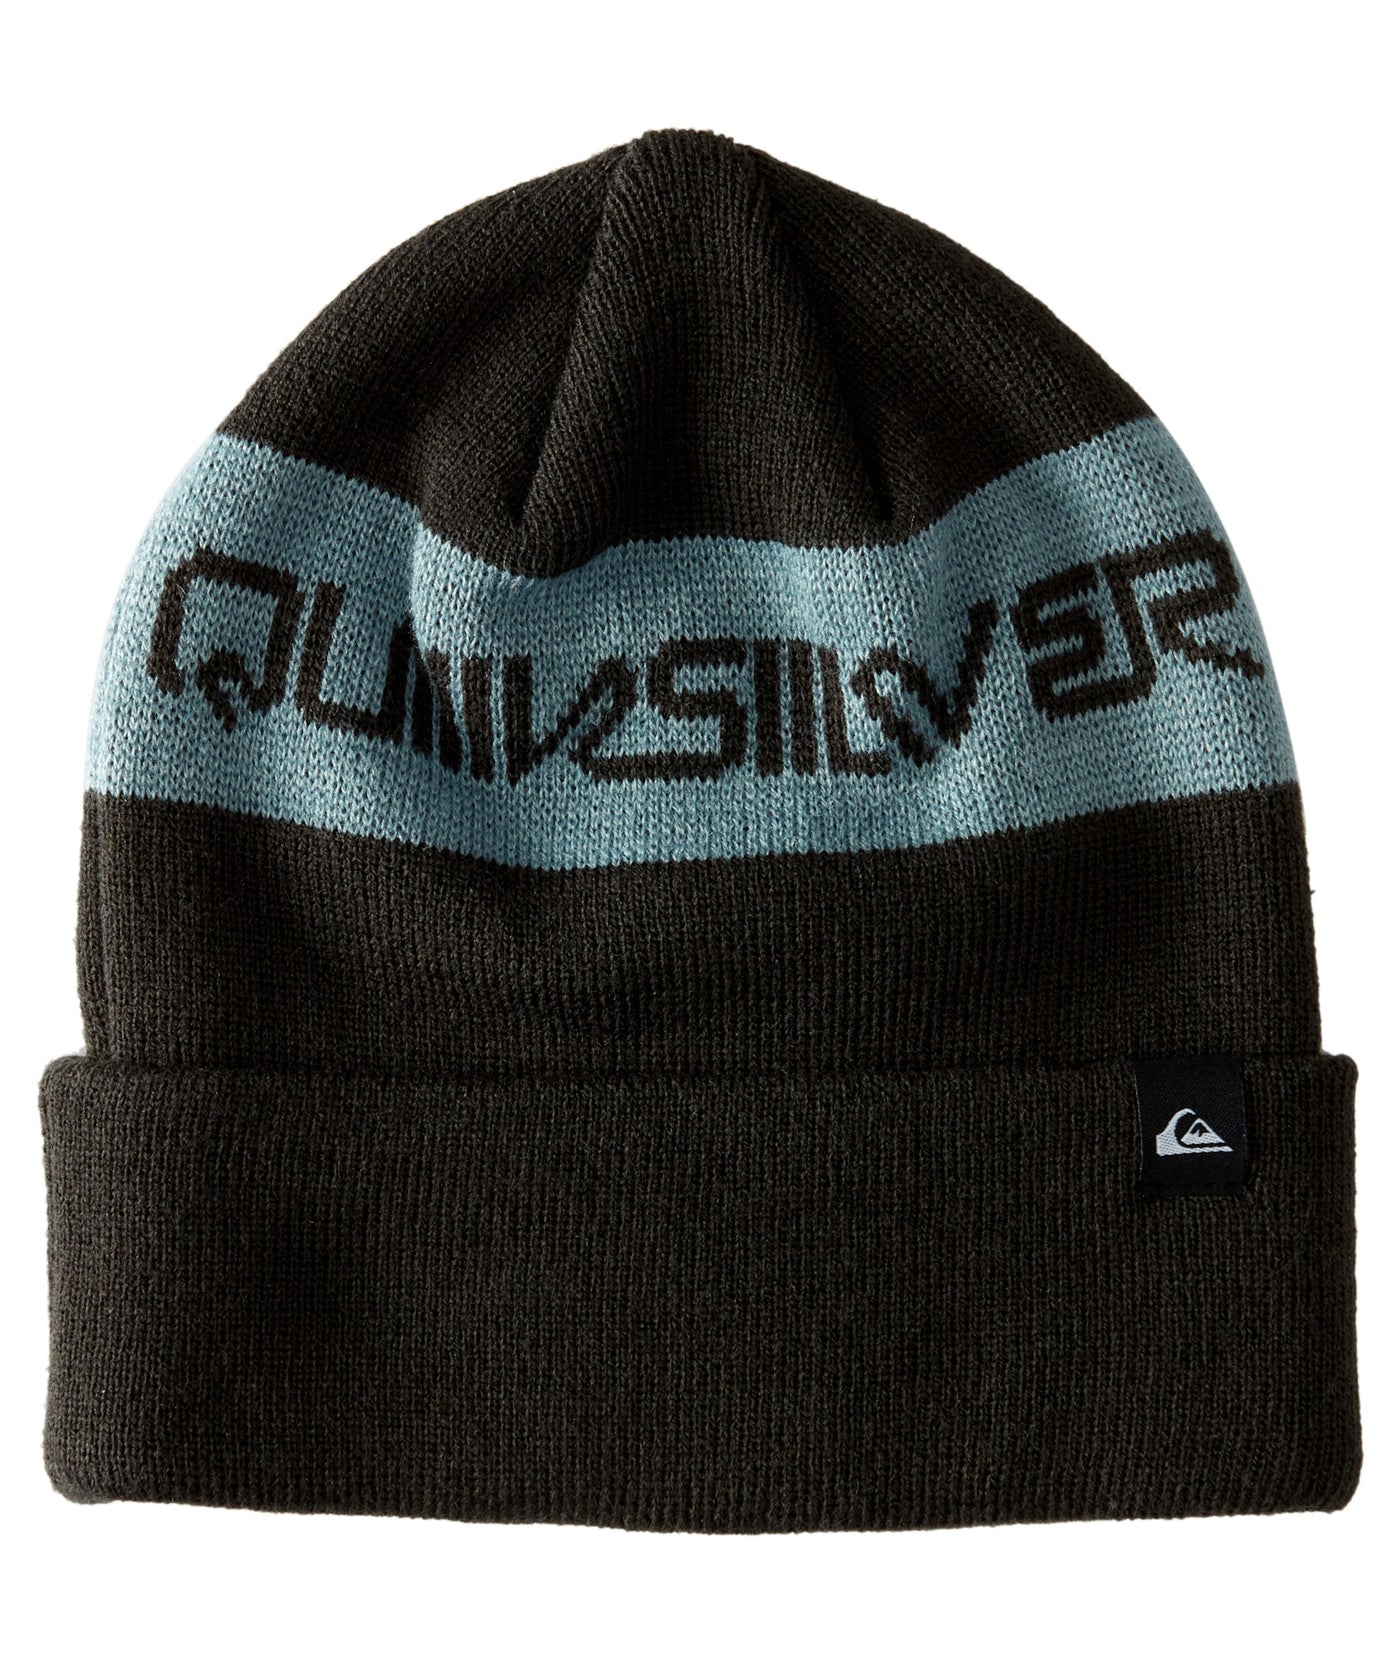 Quiksilver Hunker Downtown Youth